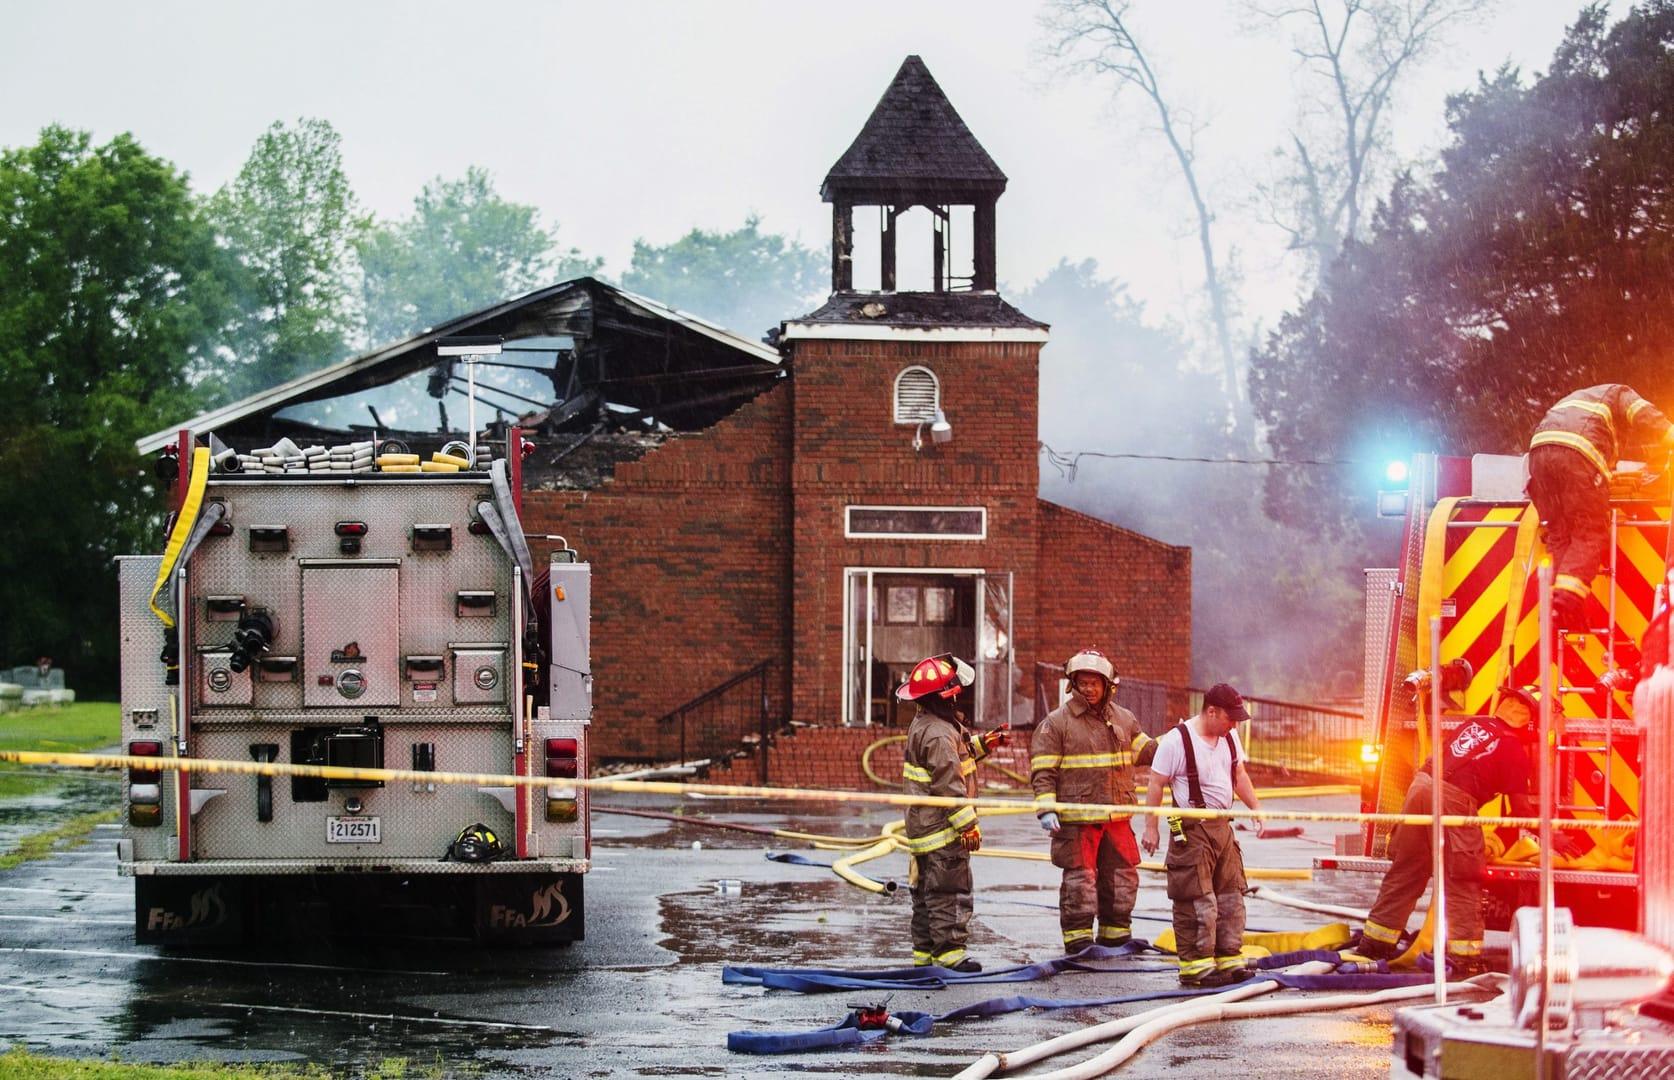 Donations for burned black churches up after Notre Dame fire